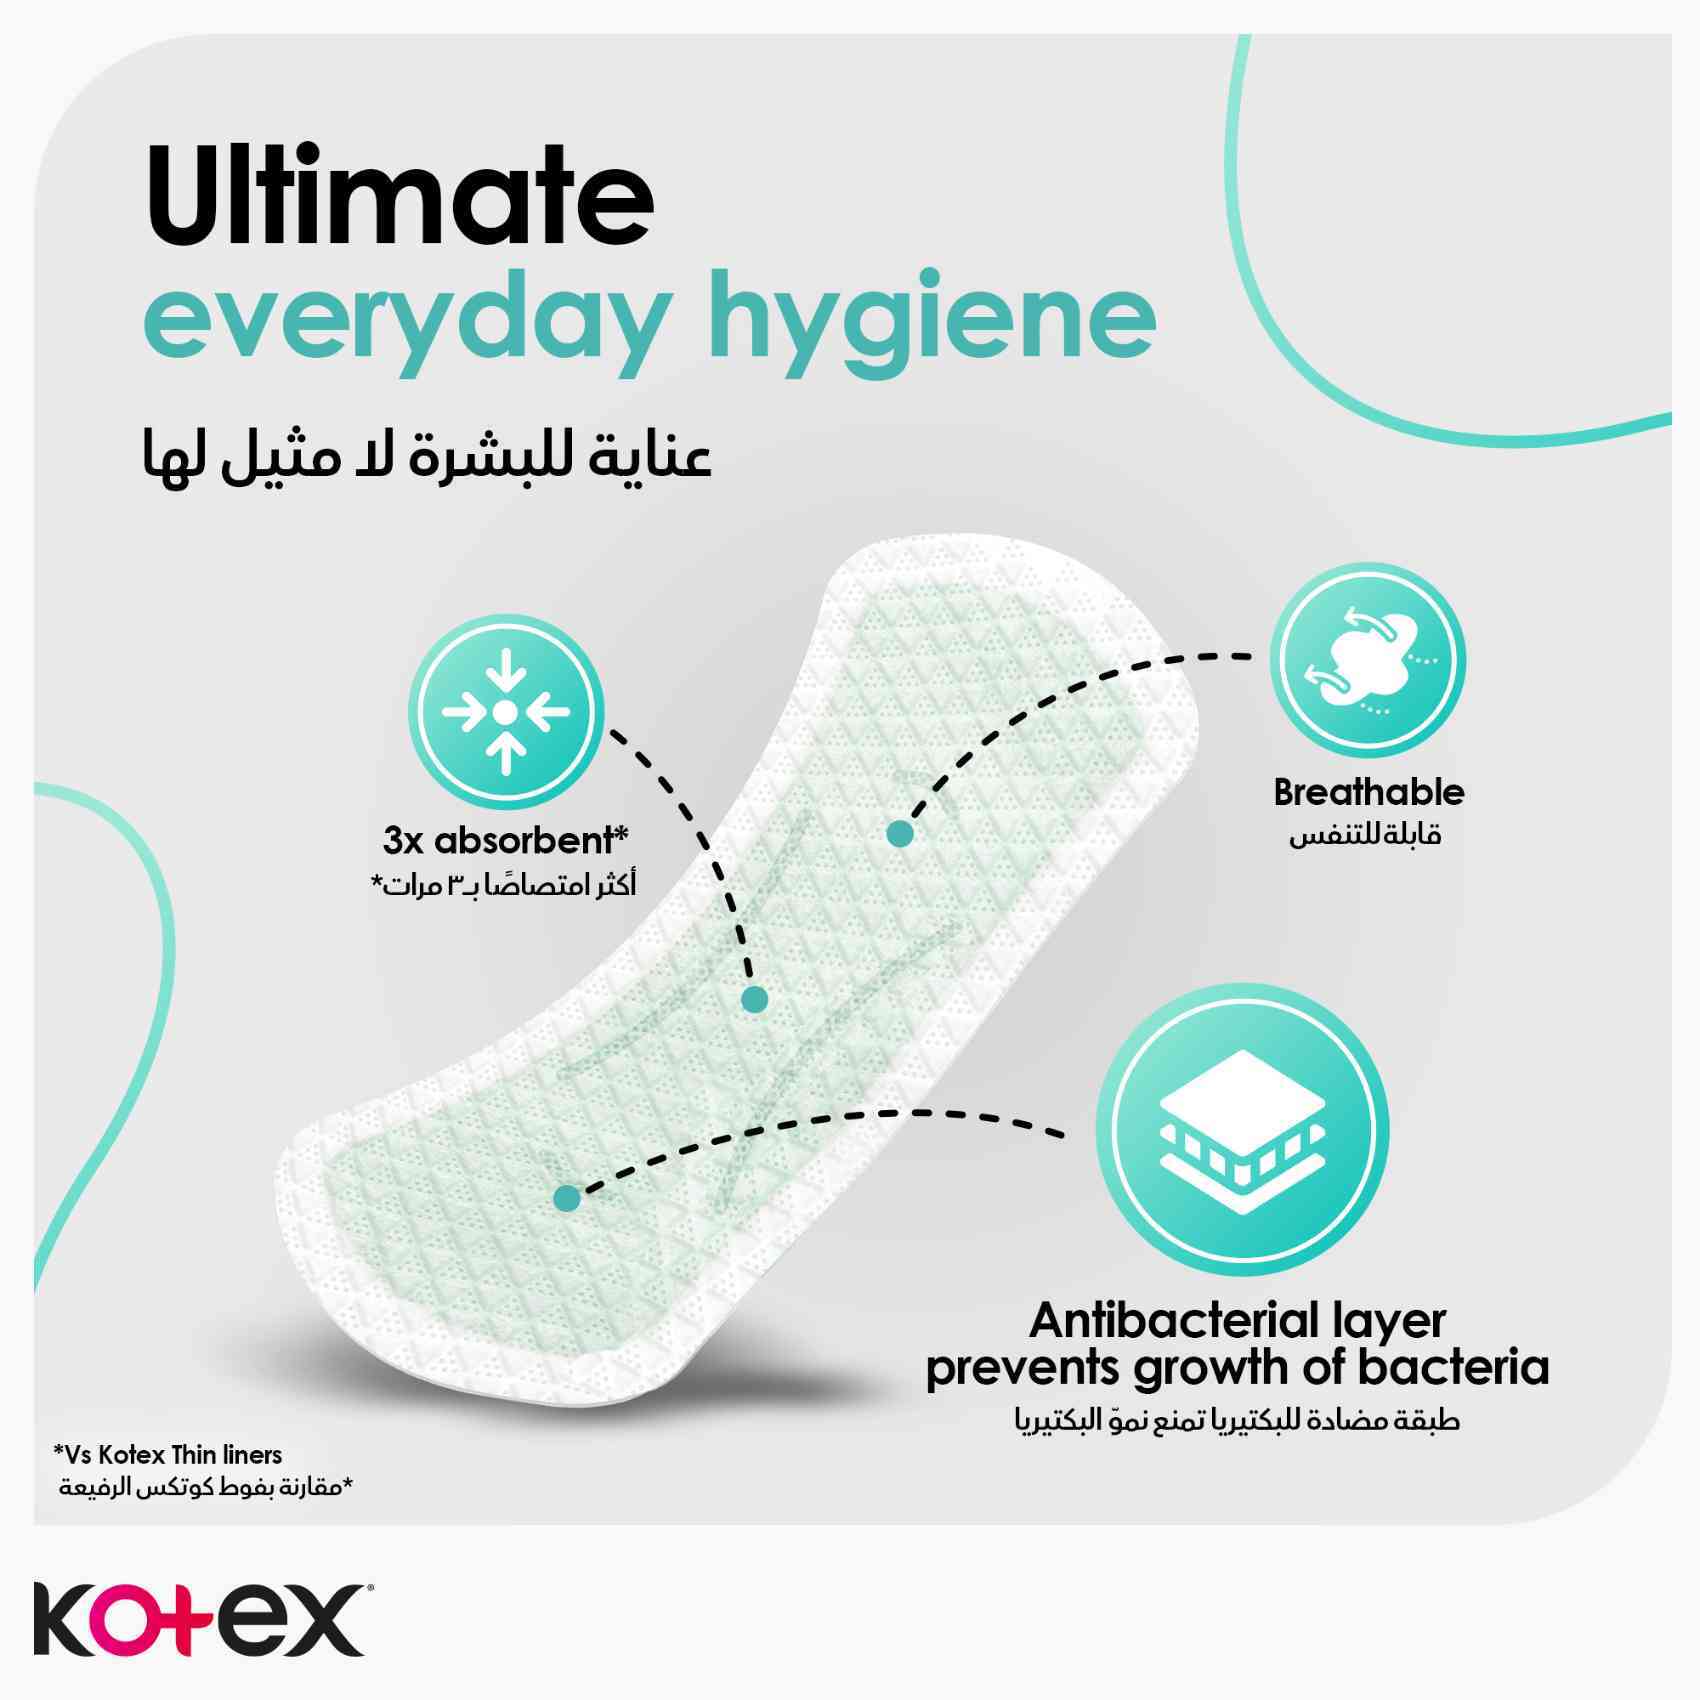 Kotex Malaysia - Did you know? Tight underwear can cause skin chafing and  trapped moisture, leading to yeast infections and UTIs. 😫 Avoid the  moisture with panty liners. Try Kotex Herbal Cool